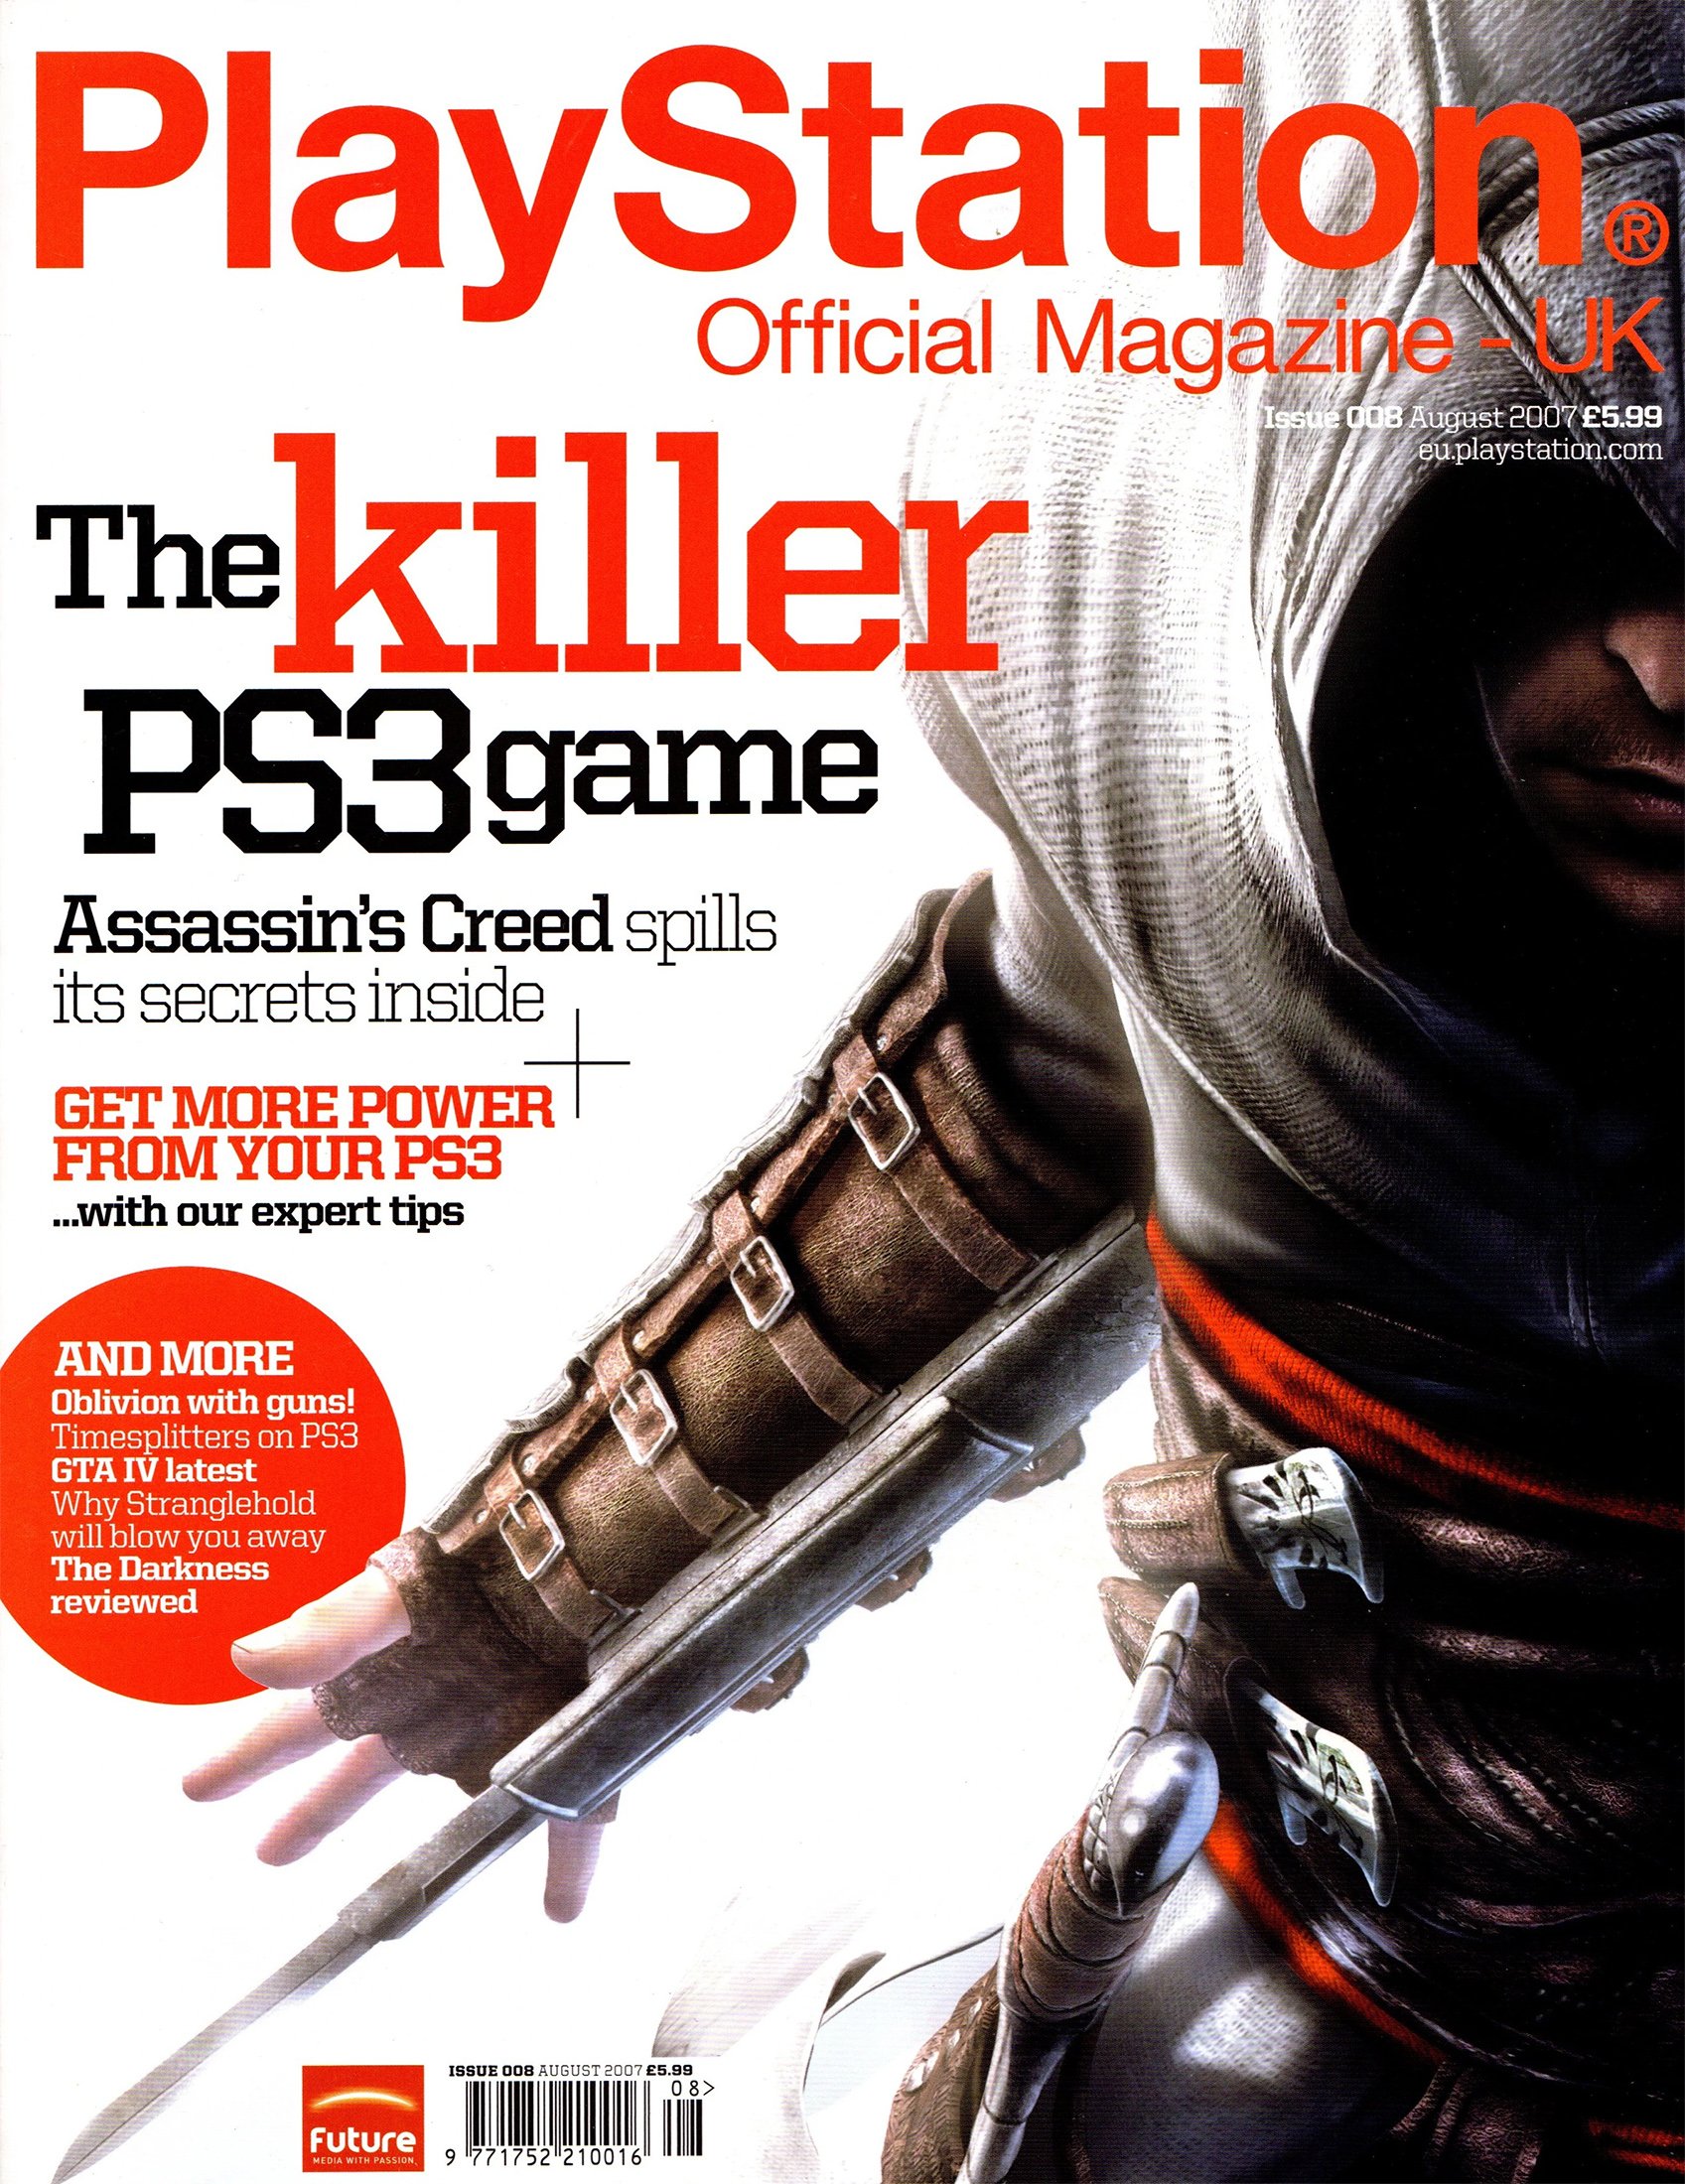 Playstation Official Magazine UK 008 (August 2007)